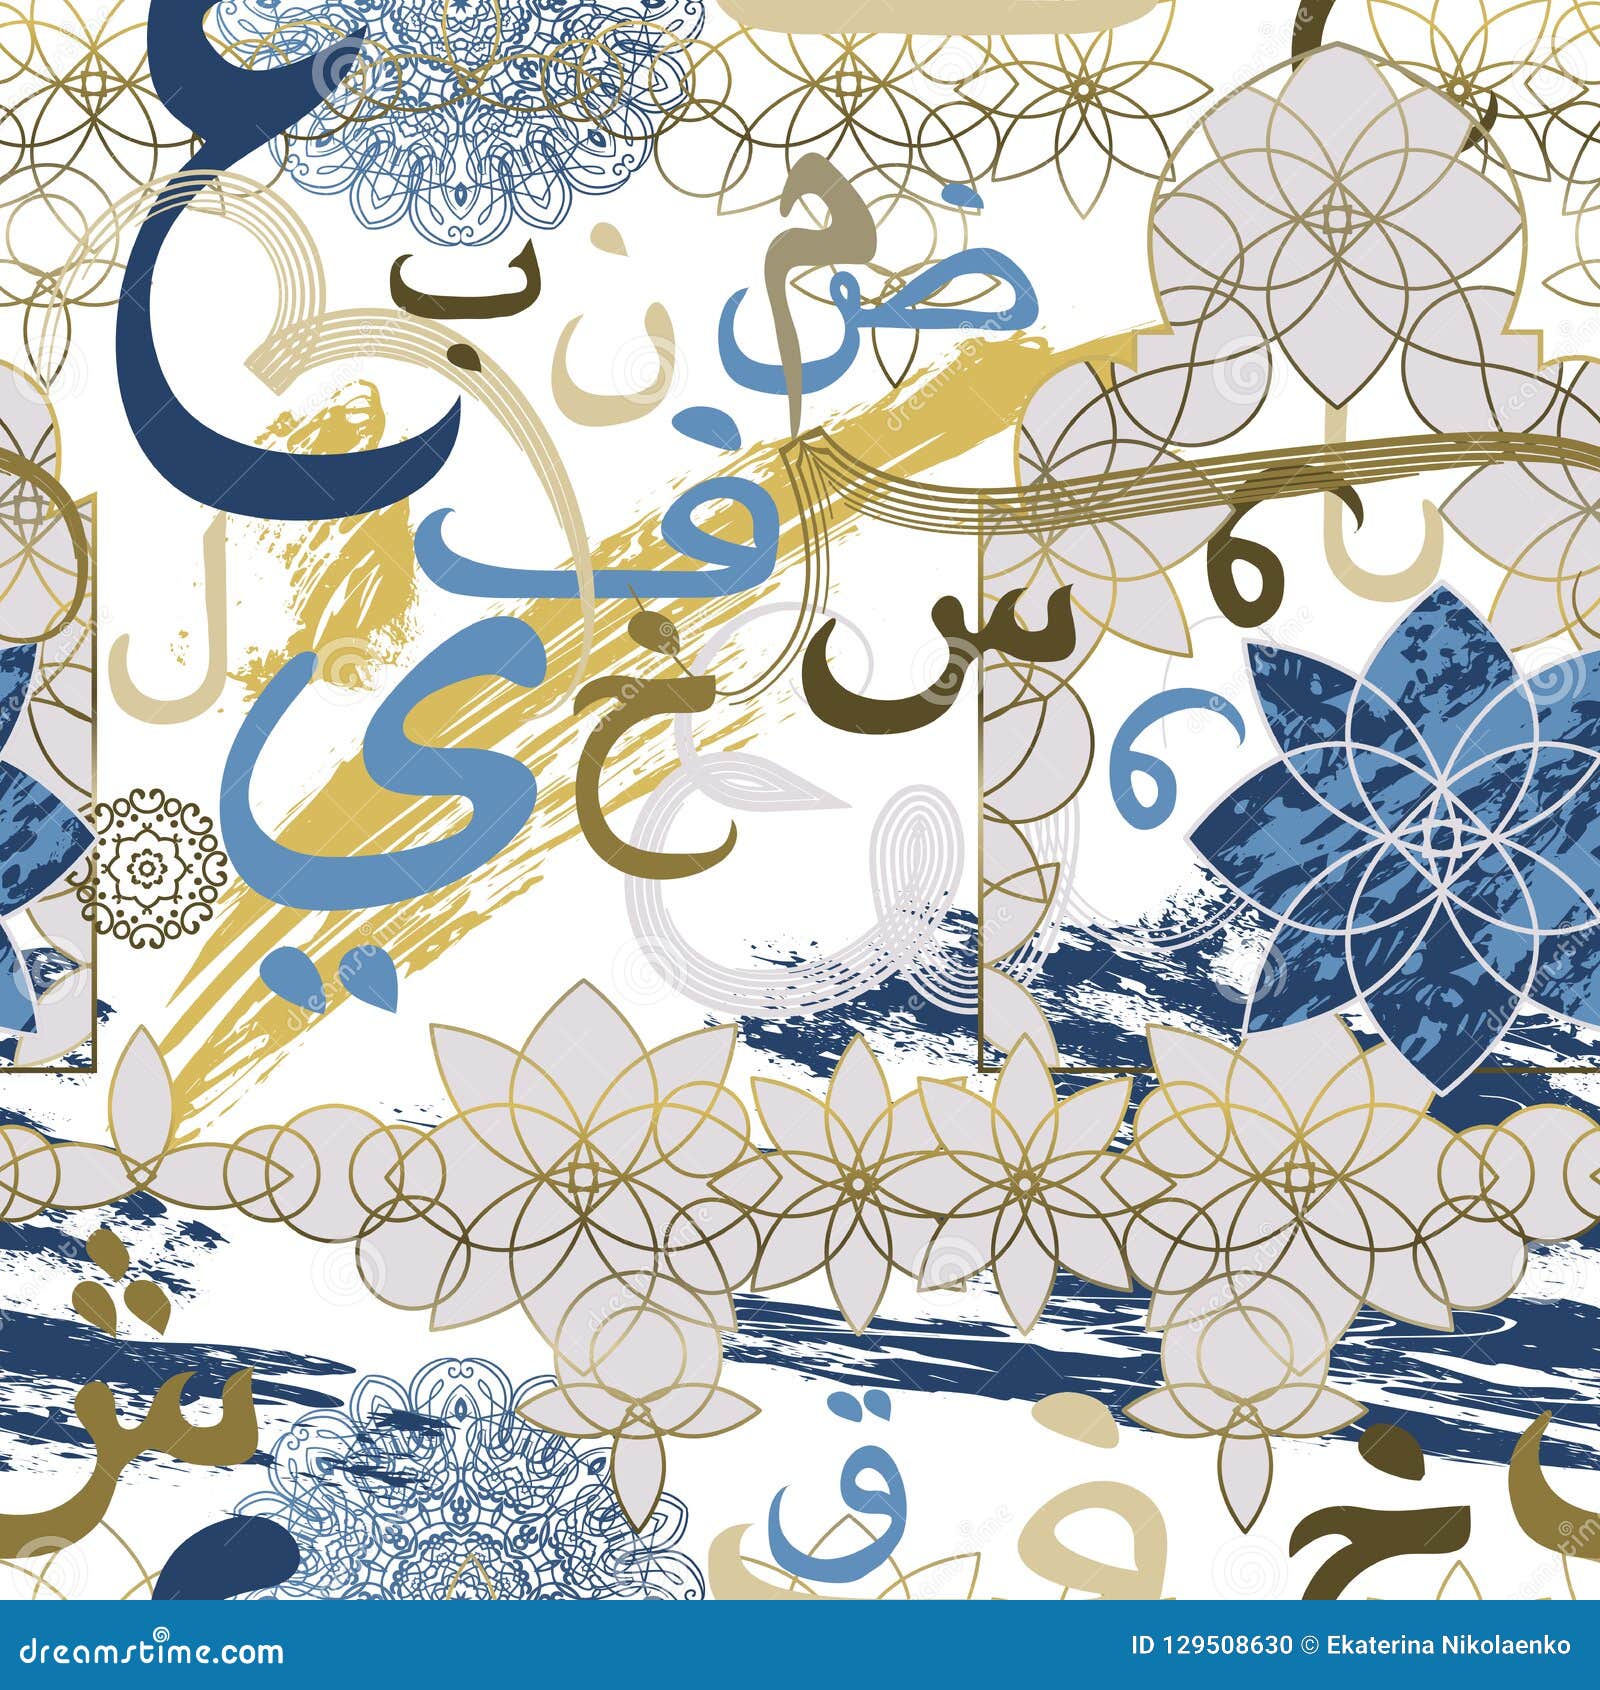 seamless pattern with arabic calligraphy. traditional islamic ornament.